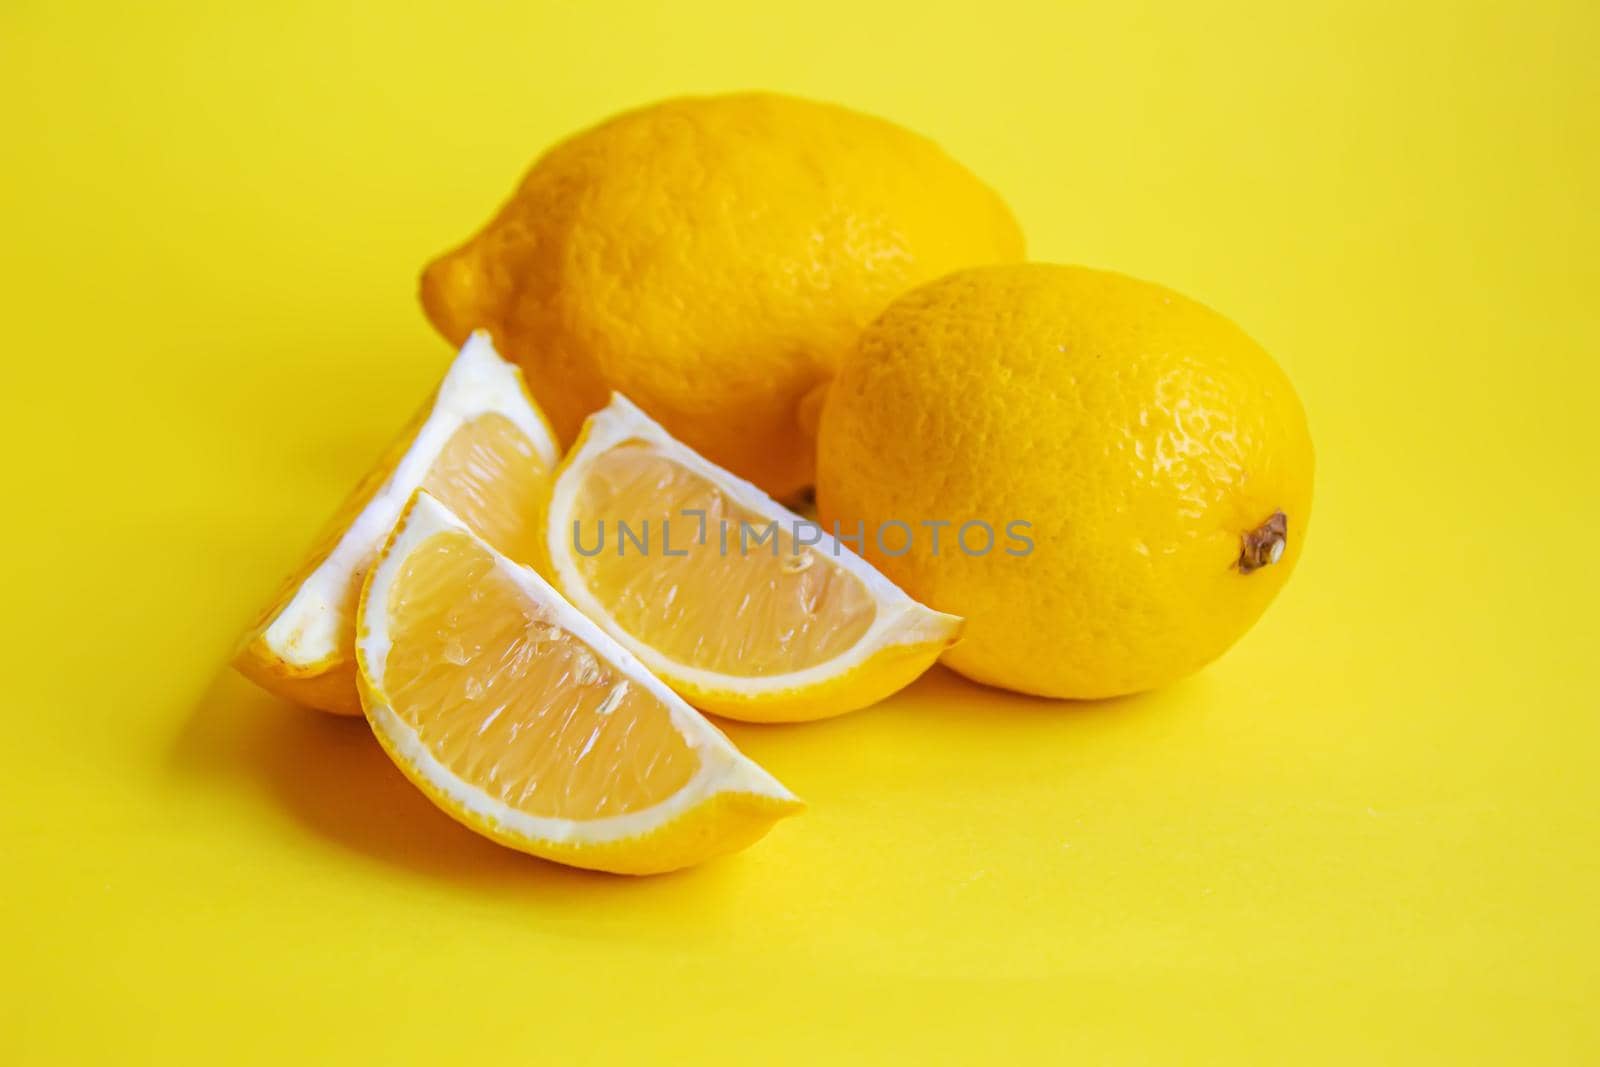 Citric acid on a yellow background. Selective focus.nature